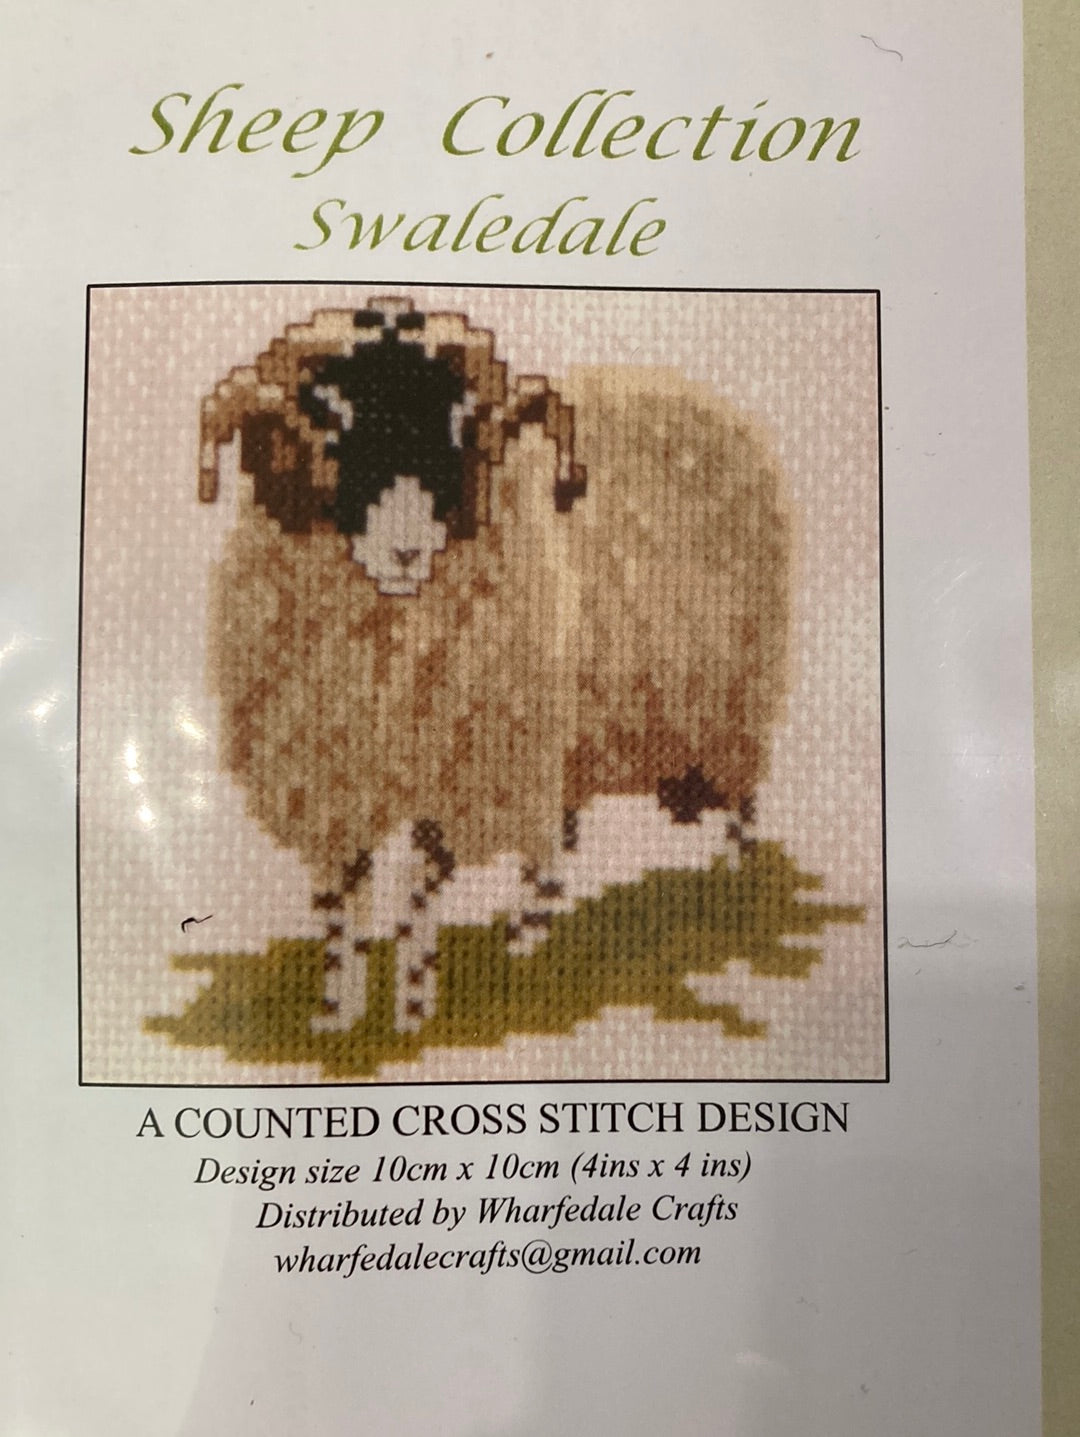 Sheep Collection - Wharfedale Crafts